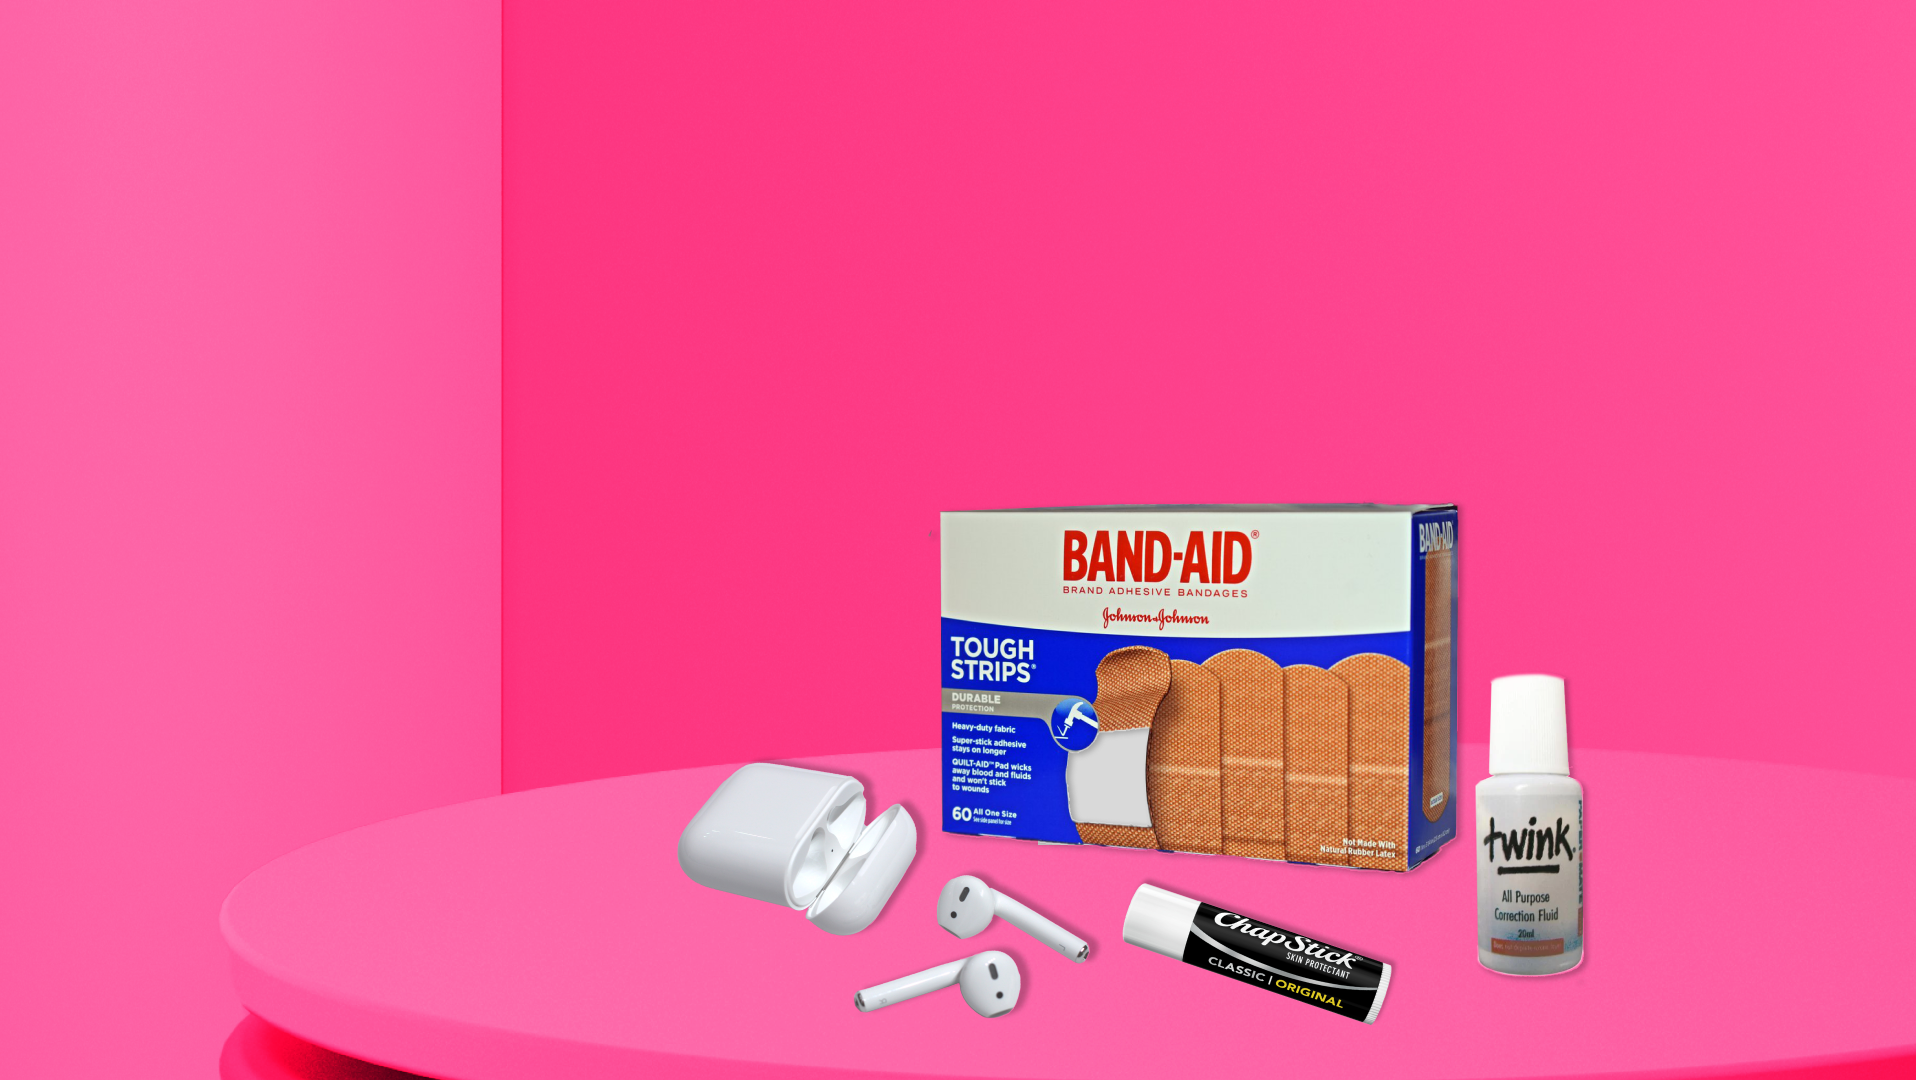 Left to right: Apple AirPods, a box of Band-Aids, Chapstick, Twink.